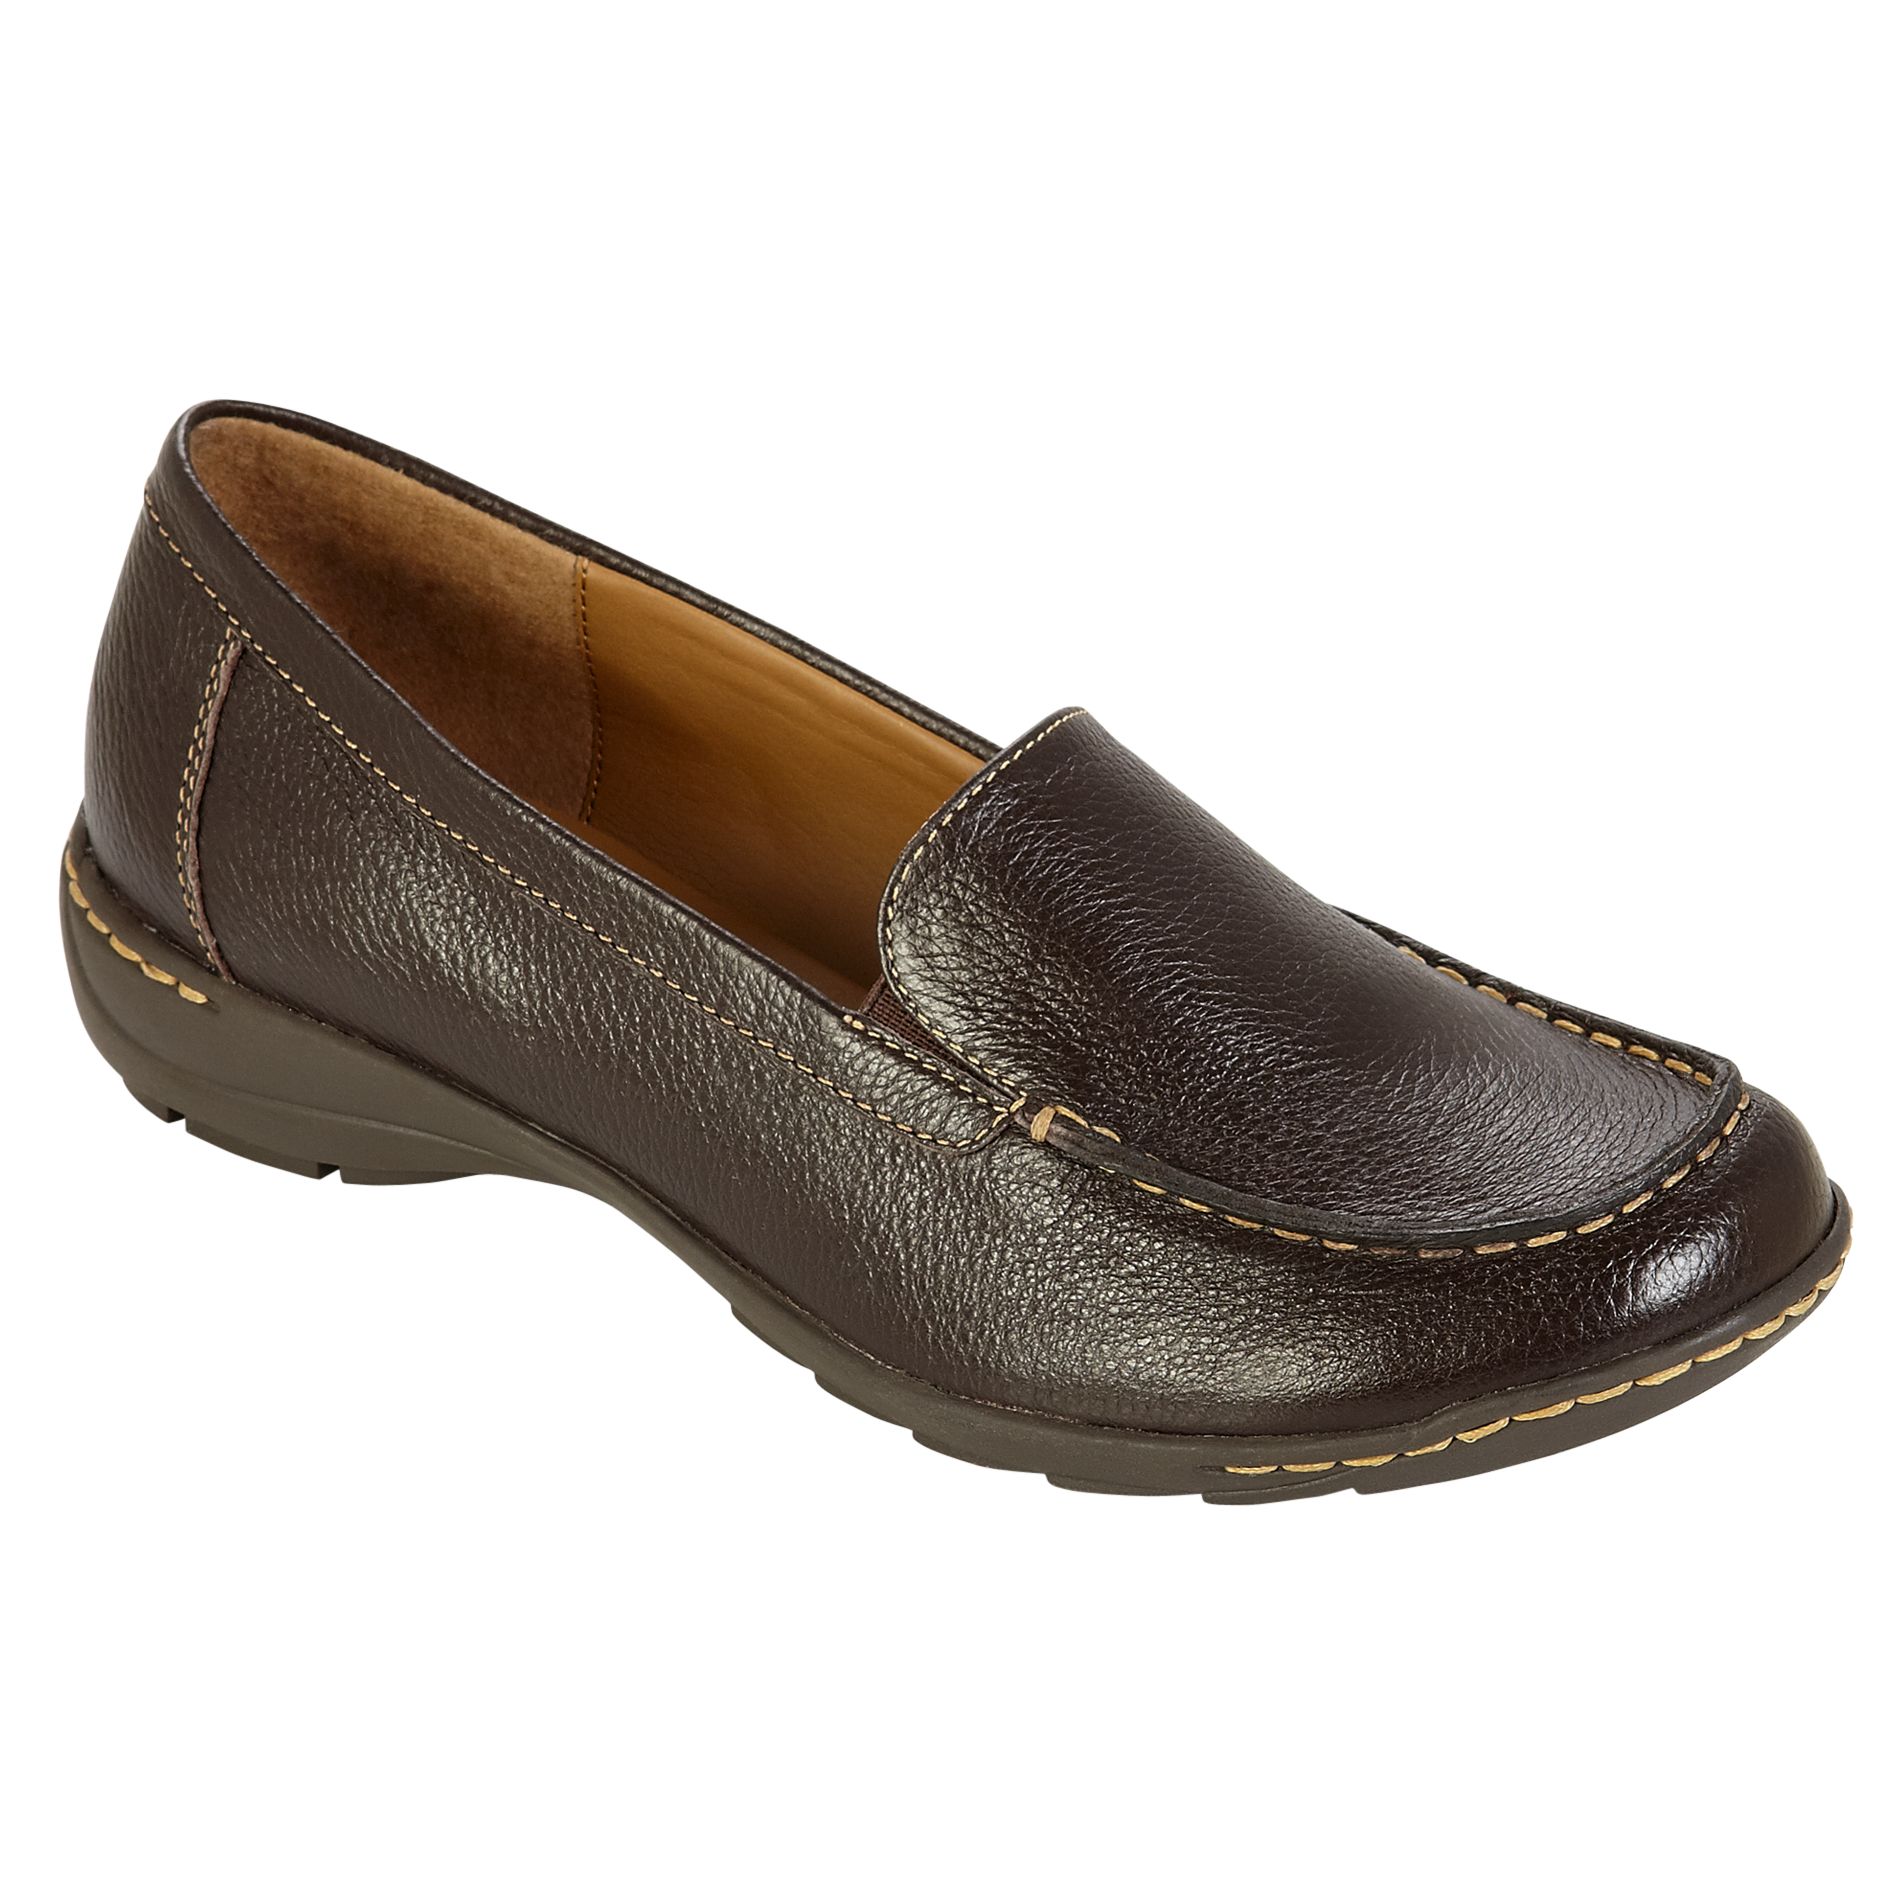 I Love Comfort Women's Casual Leather Loafer Larson - Brown